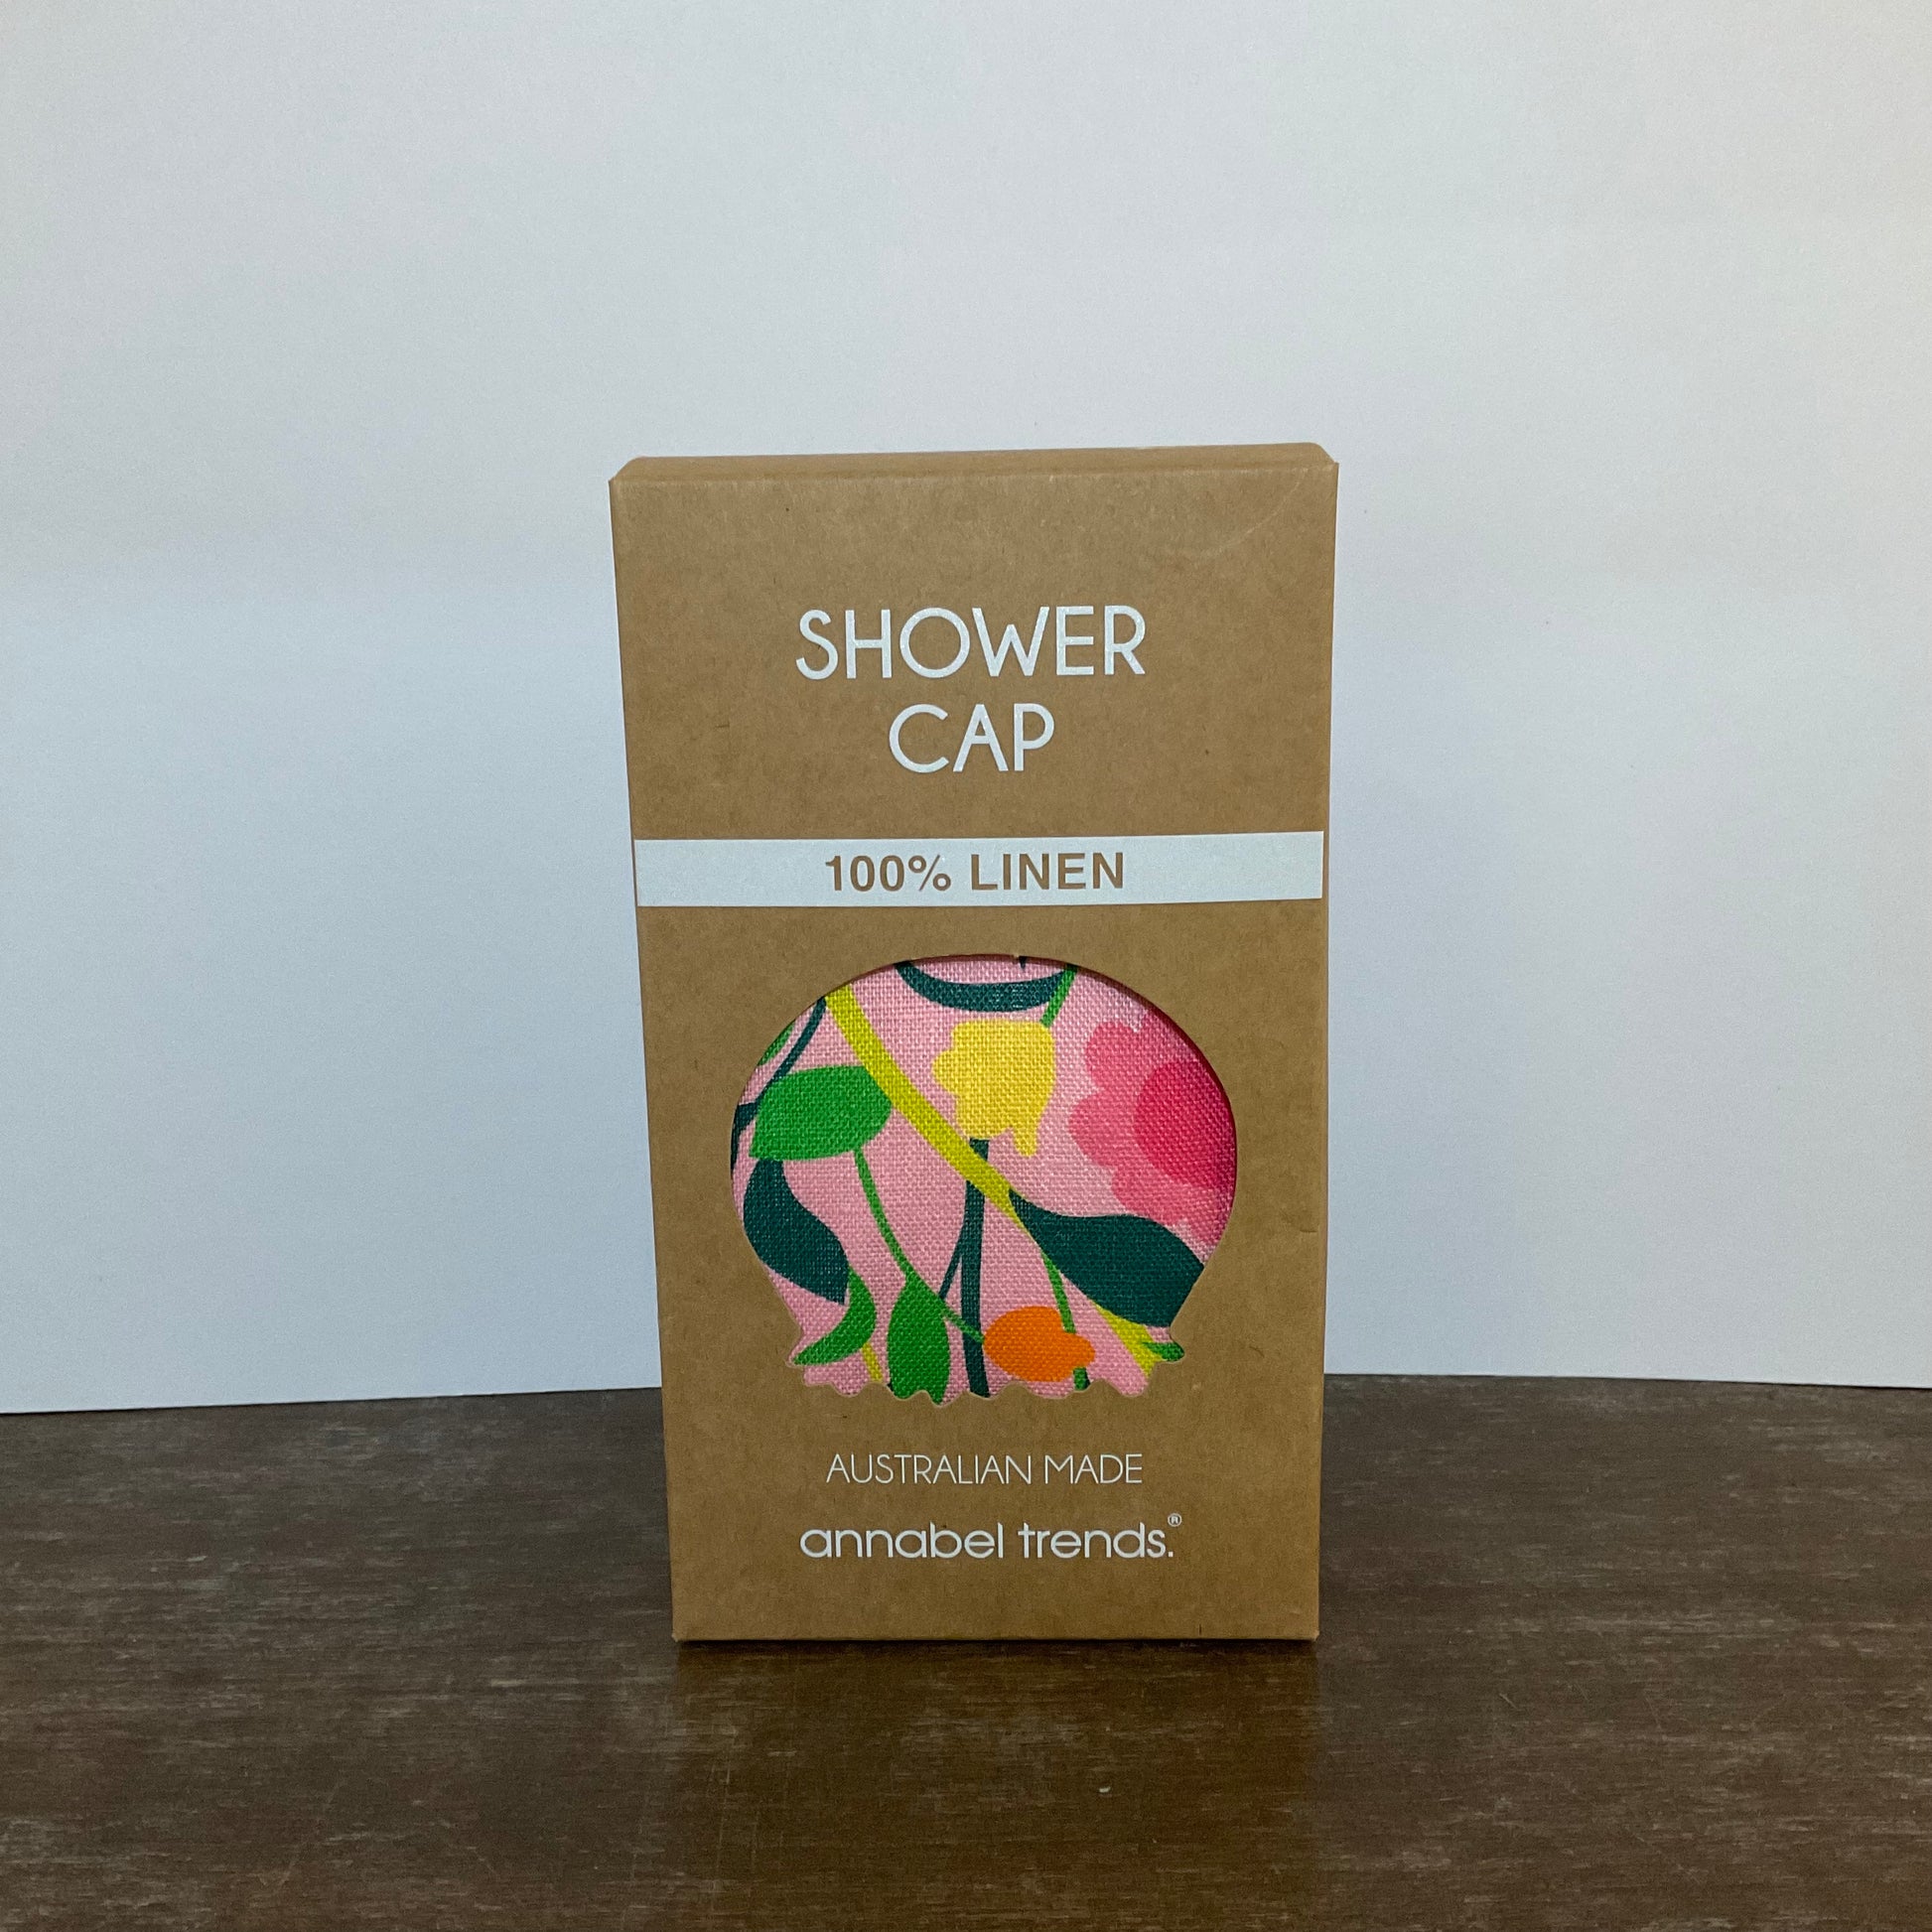 Shower cap with a floral pattern